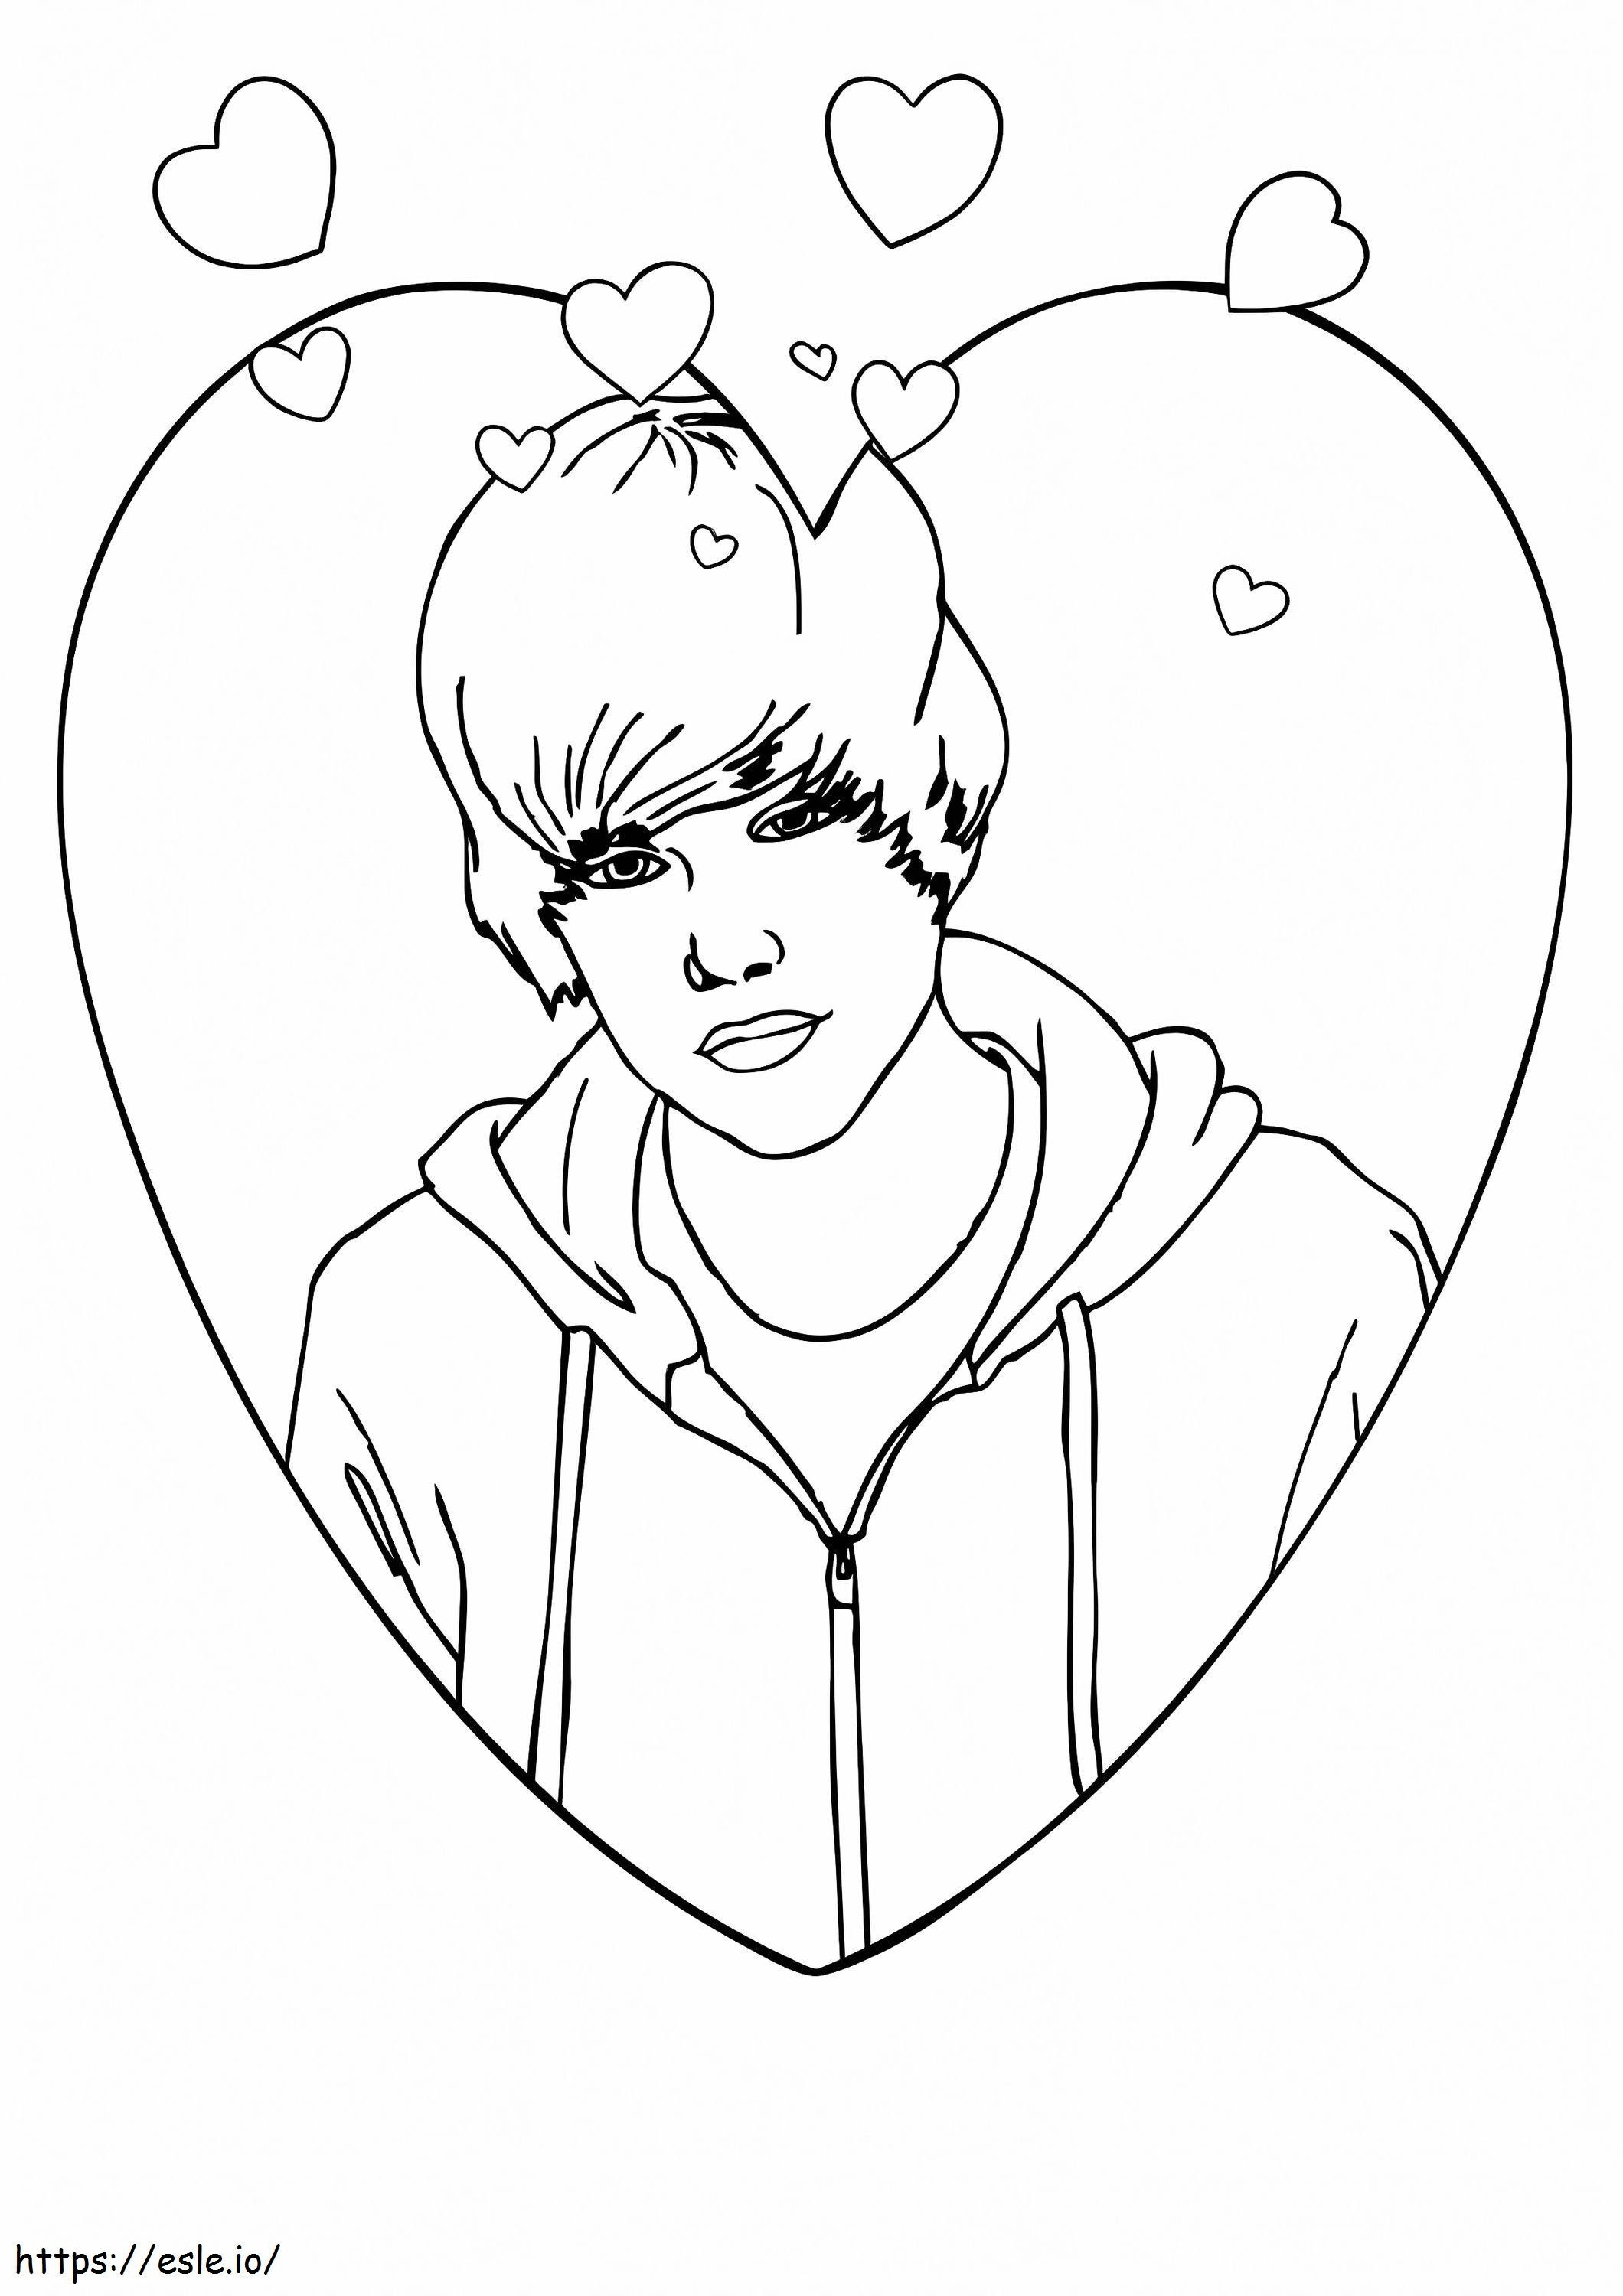 Justin Bieber In Hearts coloring page